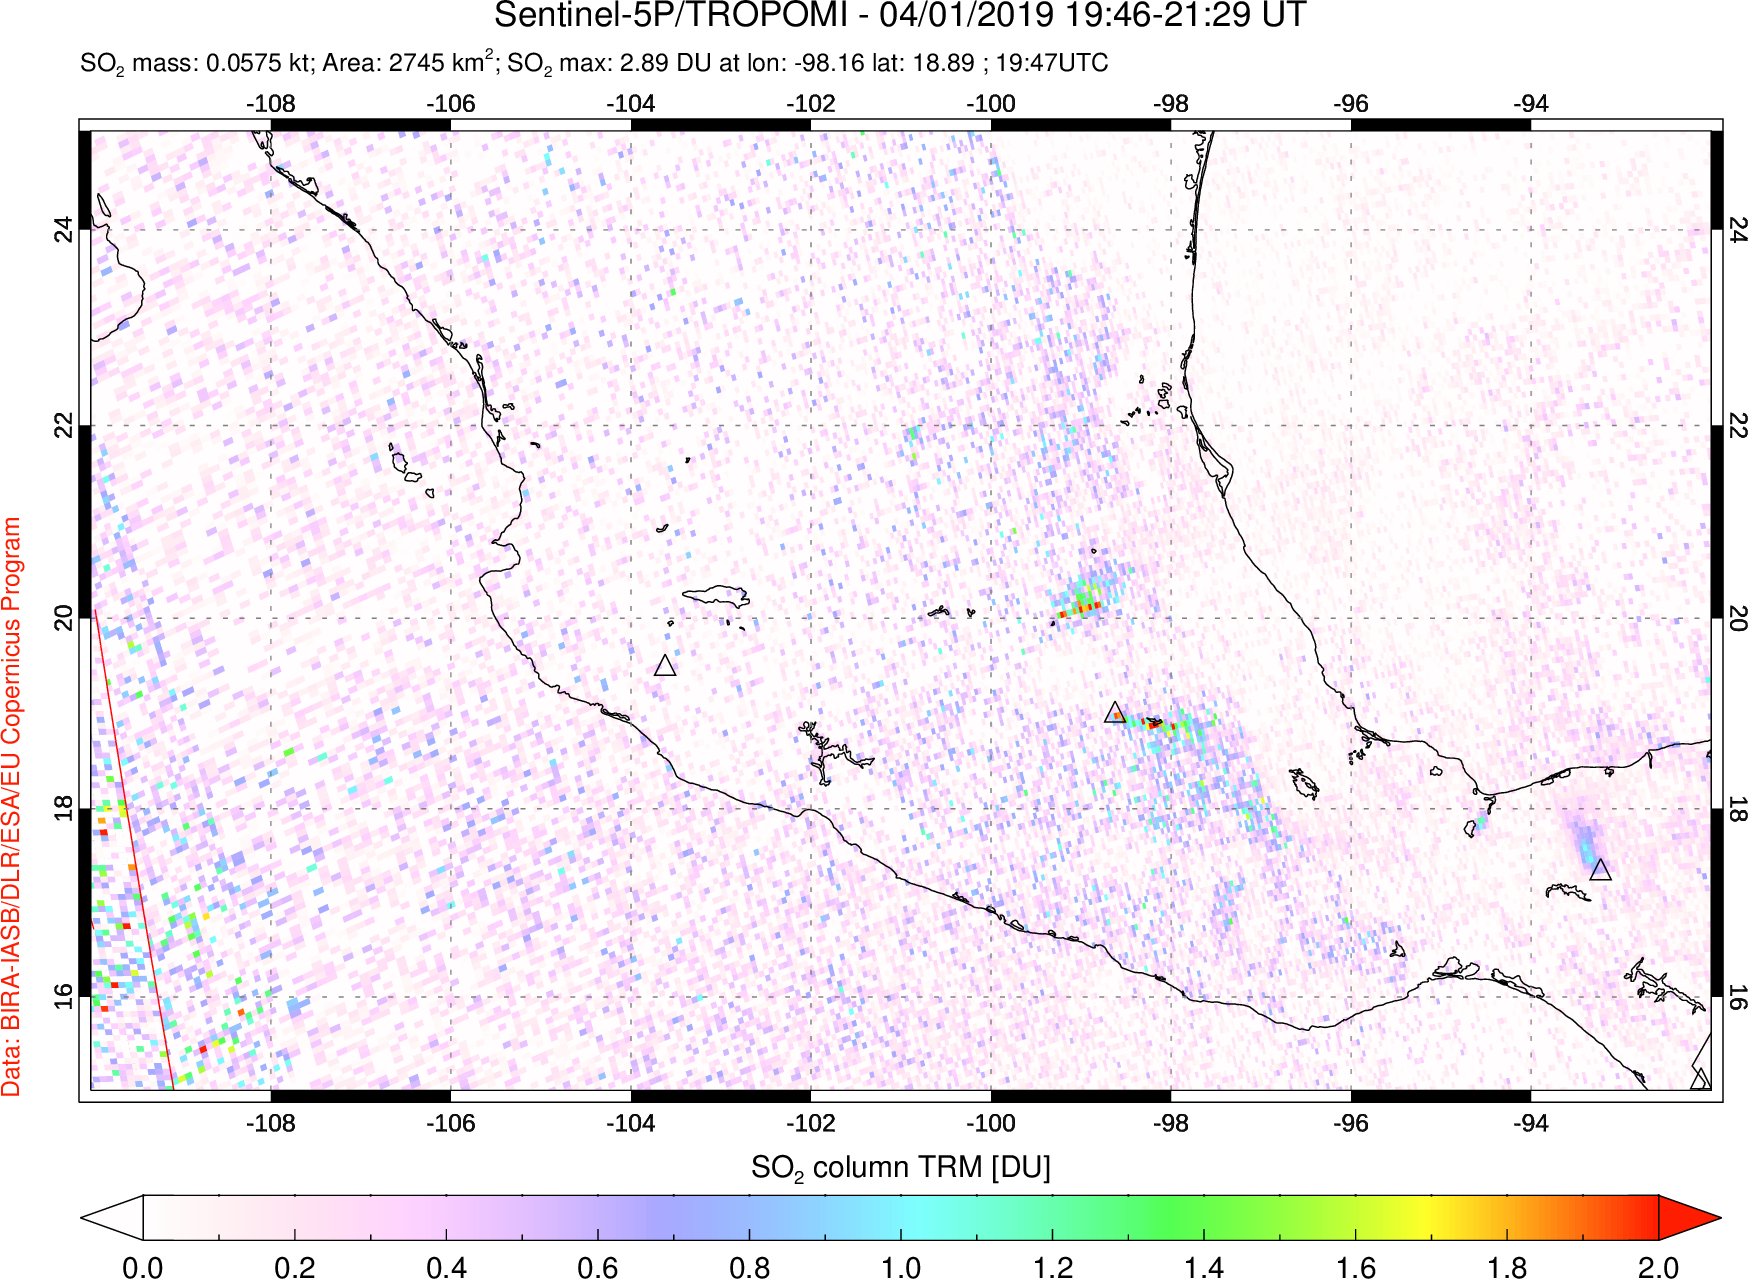 A sulfur dioxide image over Mexico on Apr 01, 2019.